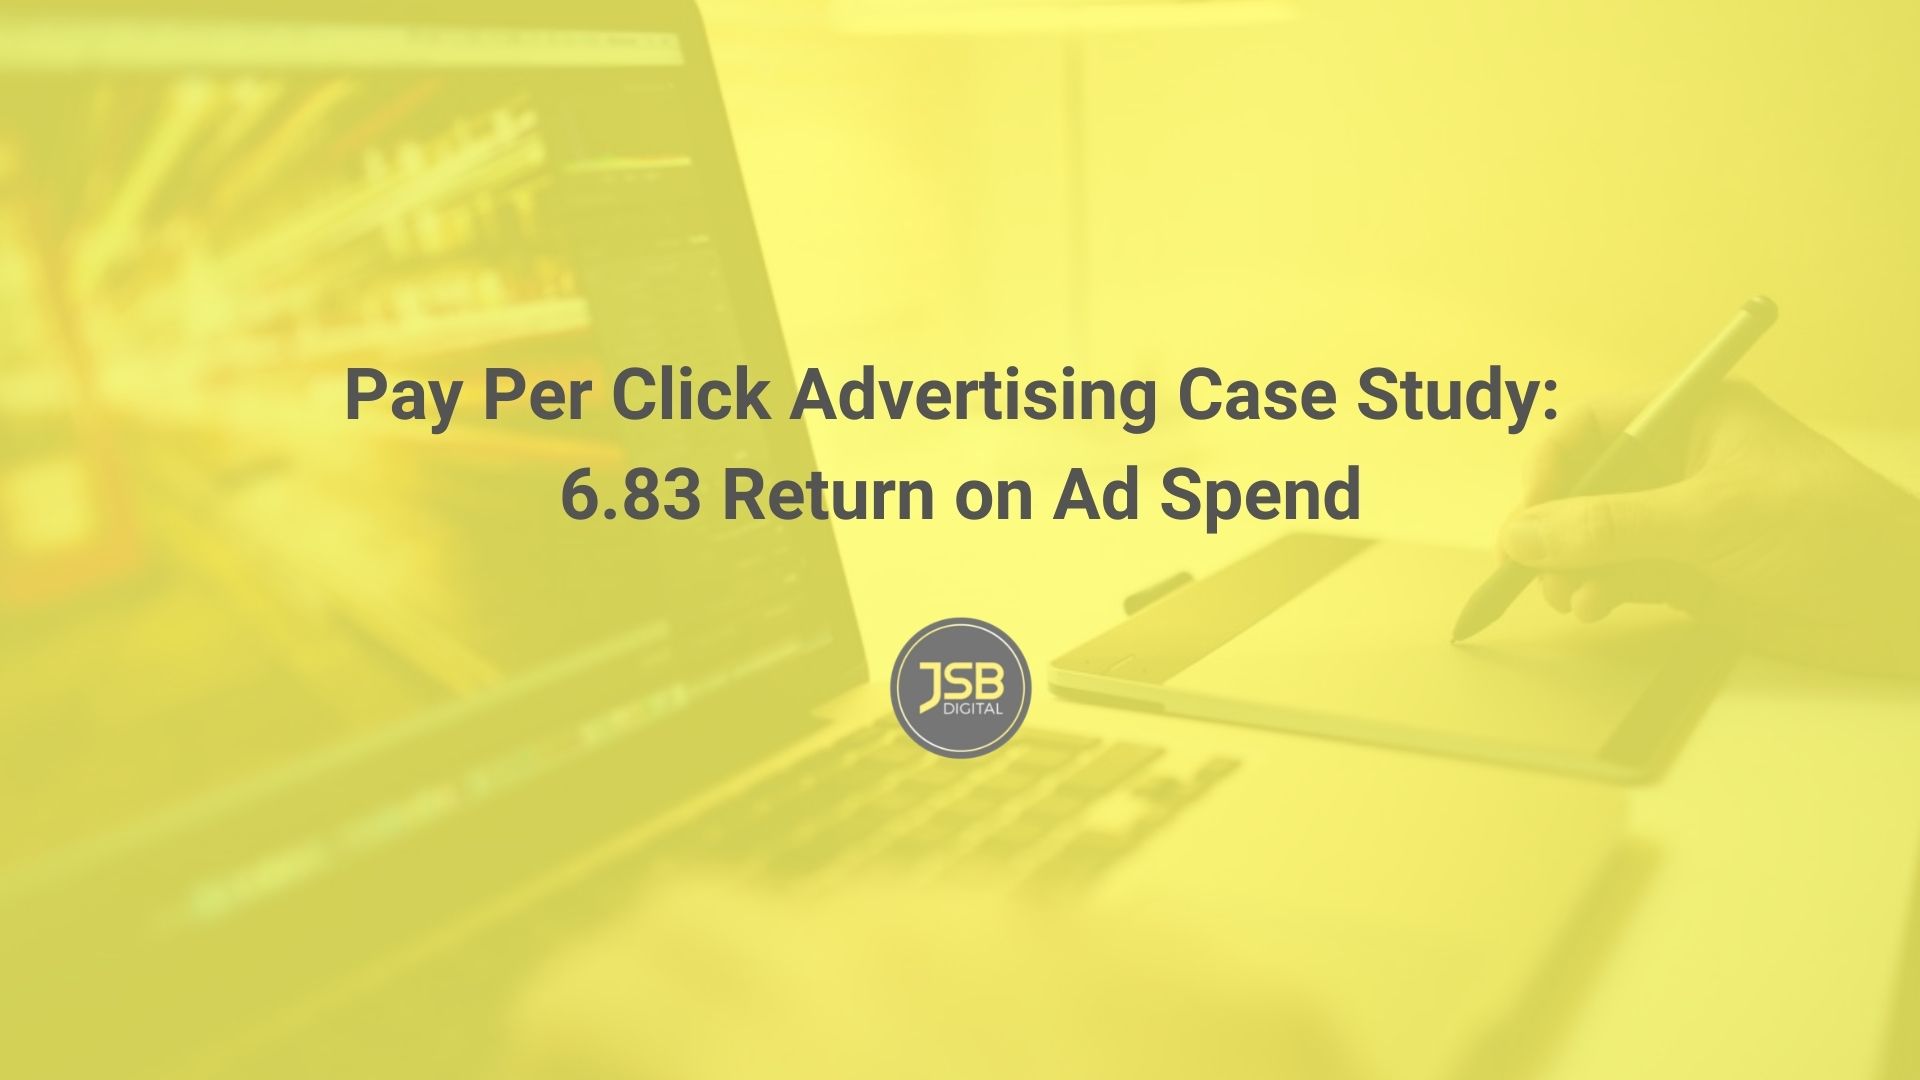 Pay Per Click Advertising Case Study 6.83 Return on Ad Spend Case Study cover image.